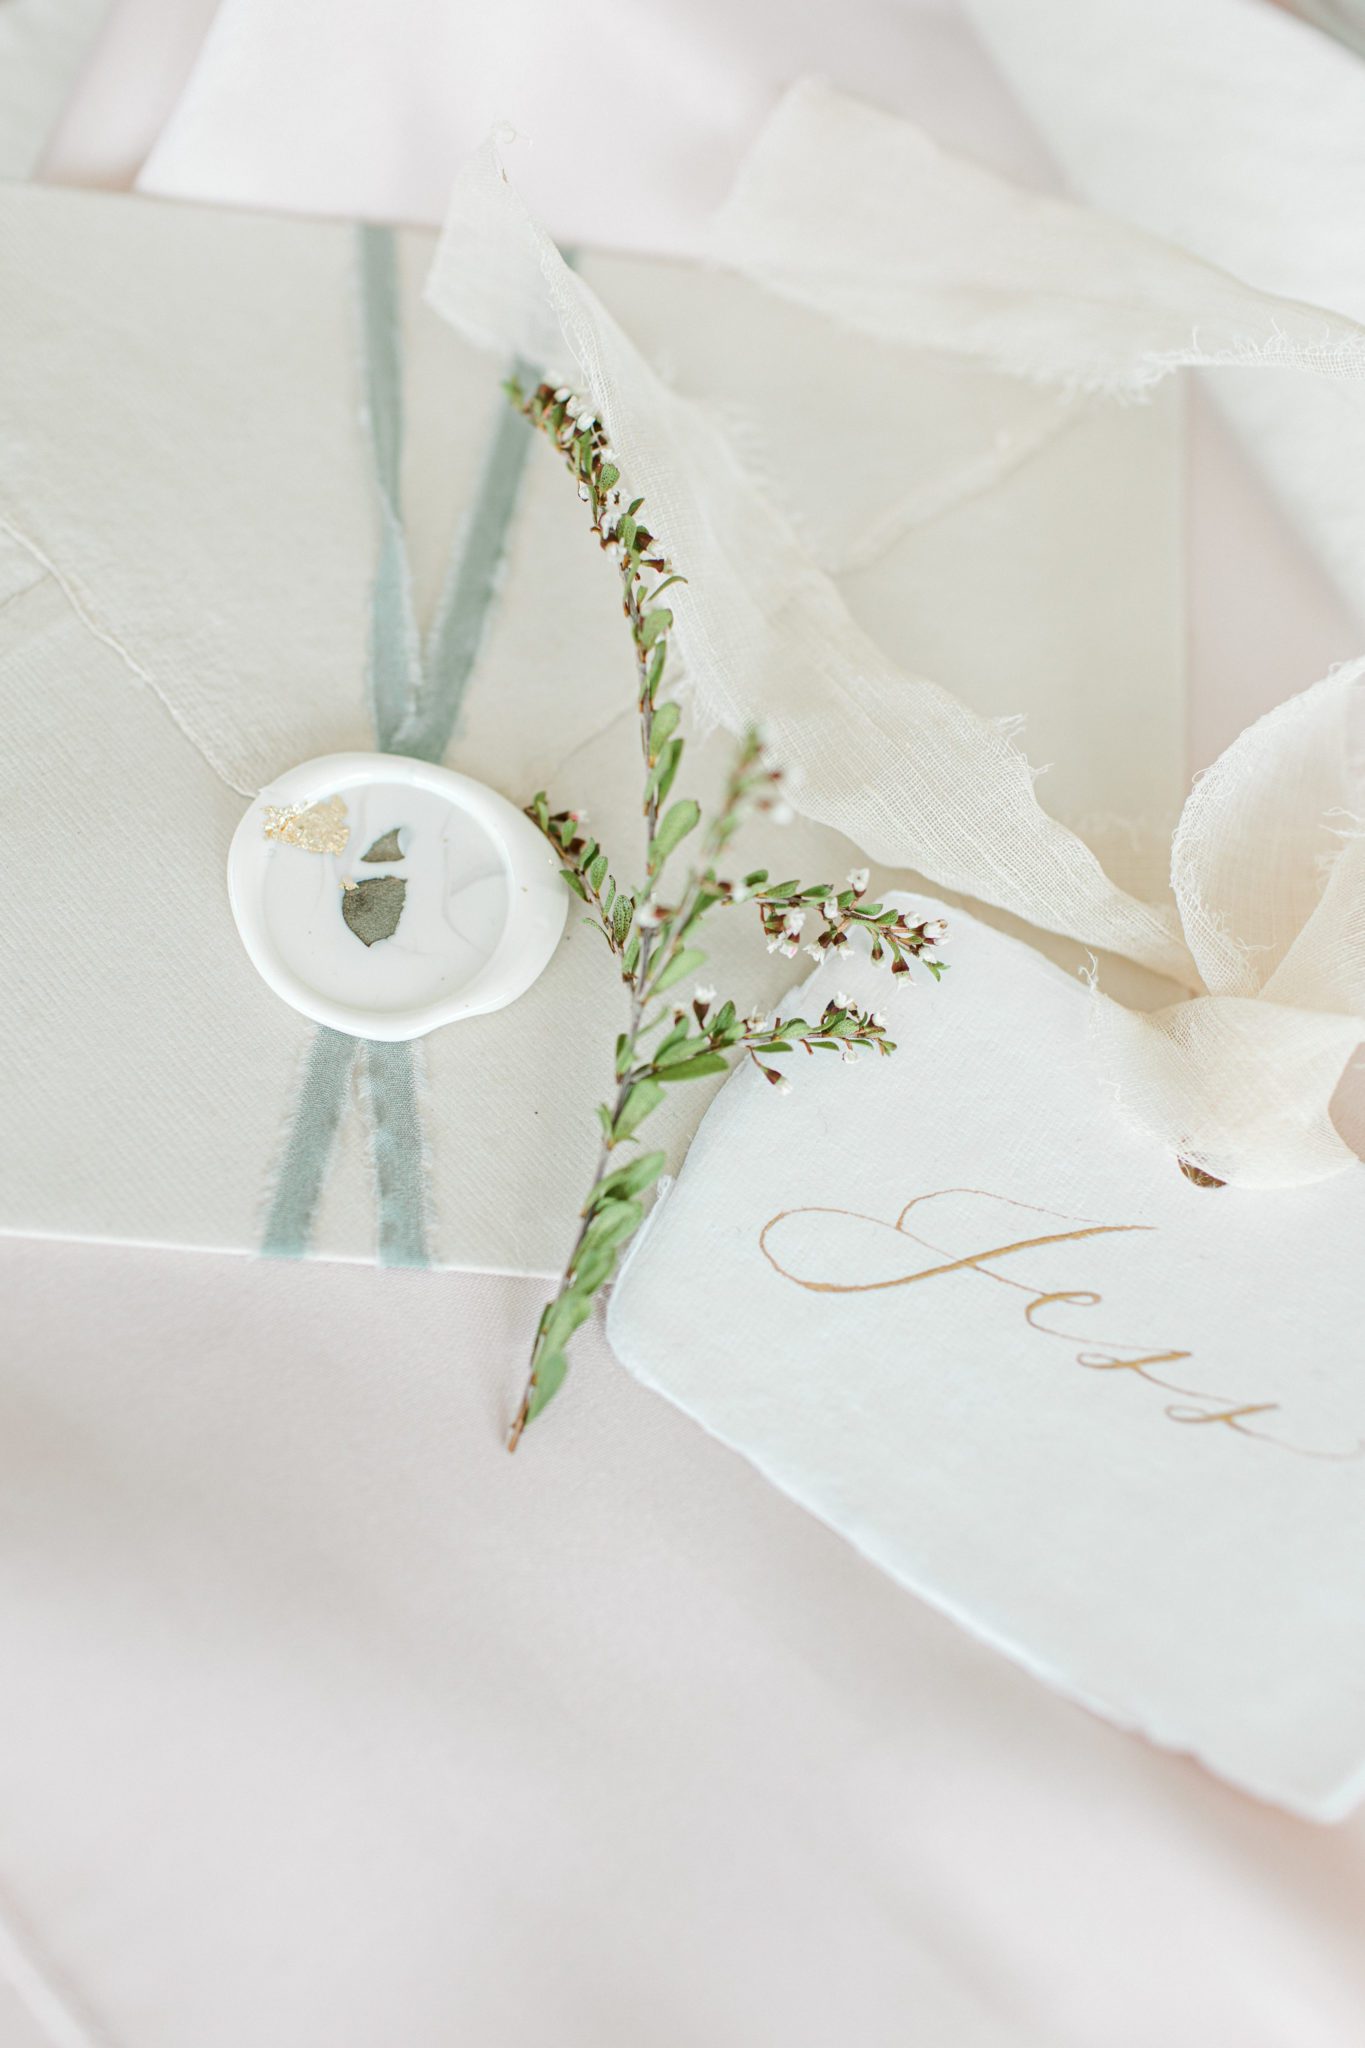 Wedding stationery in blush and green at Canmore intimate wedding.